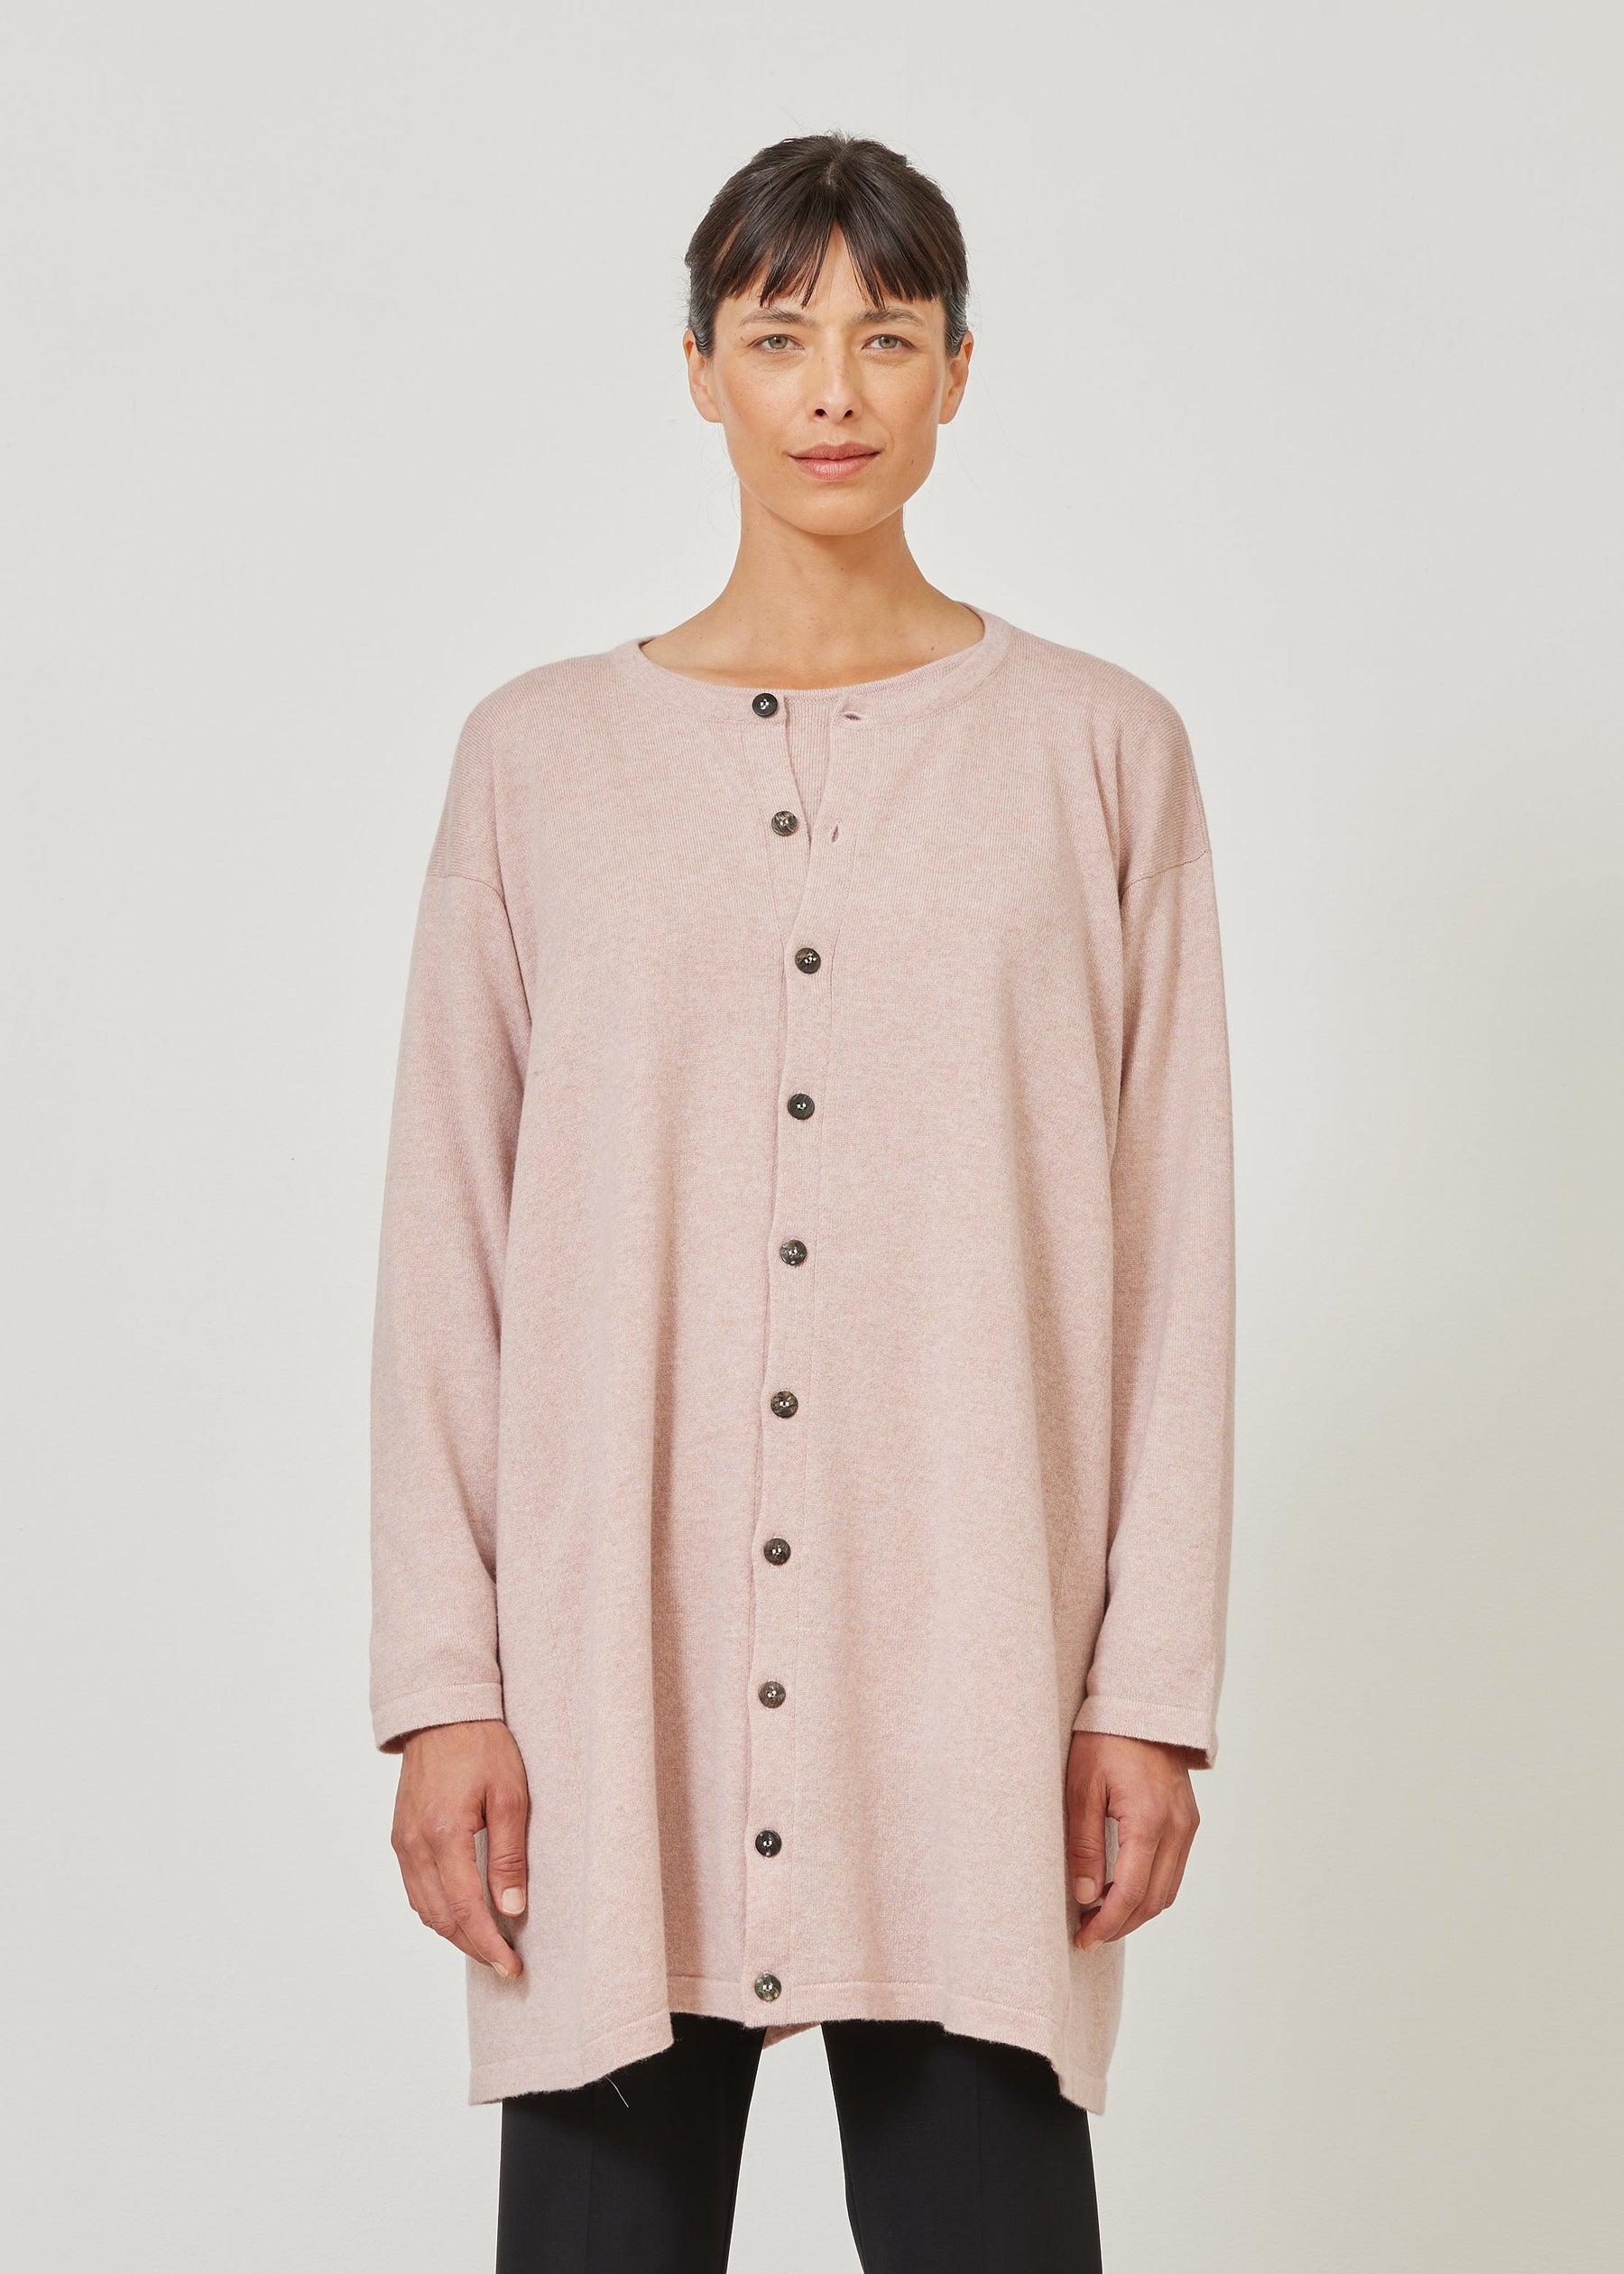 knitted side panelled cardigan - long plus